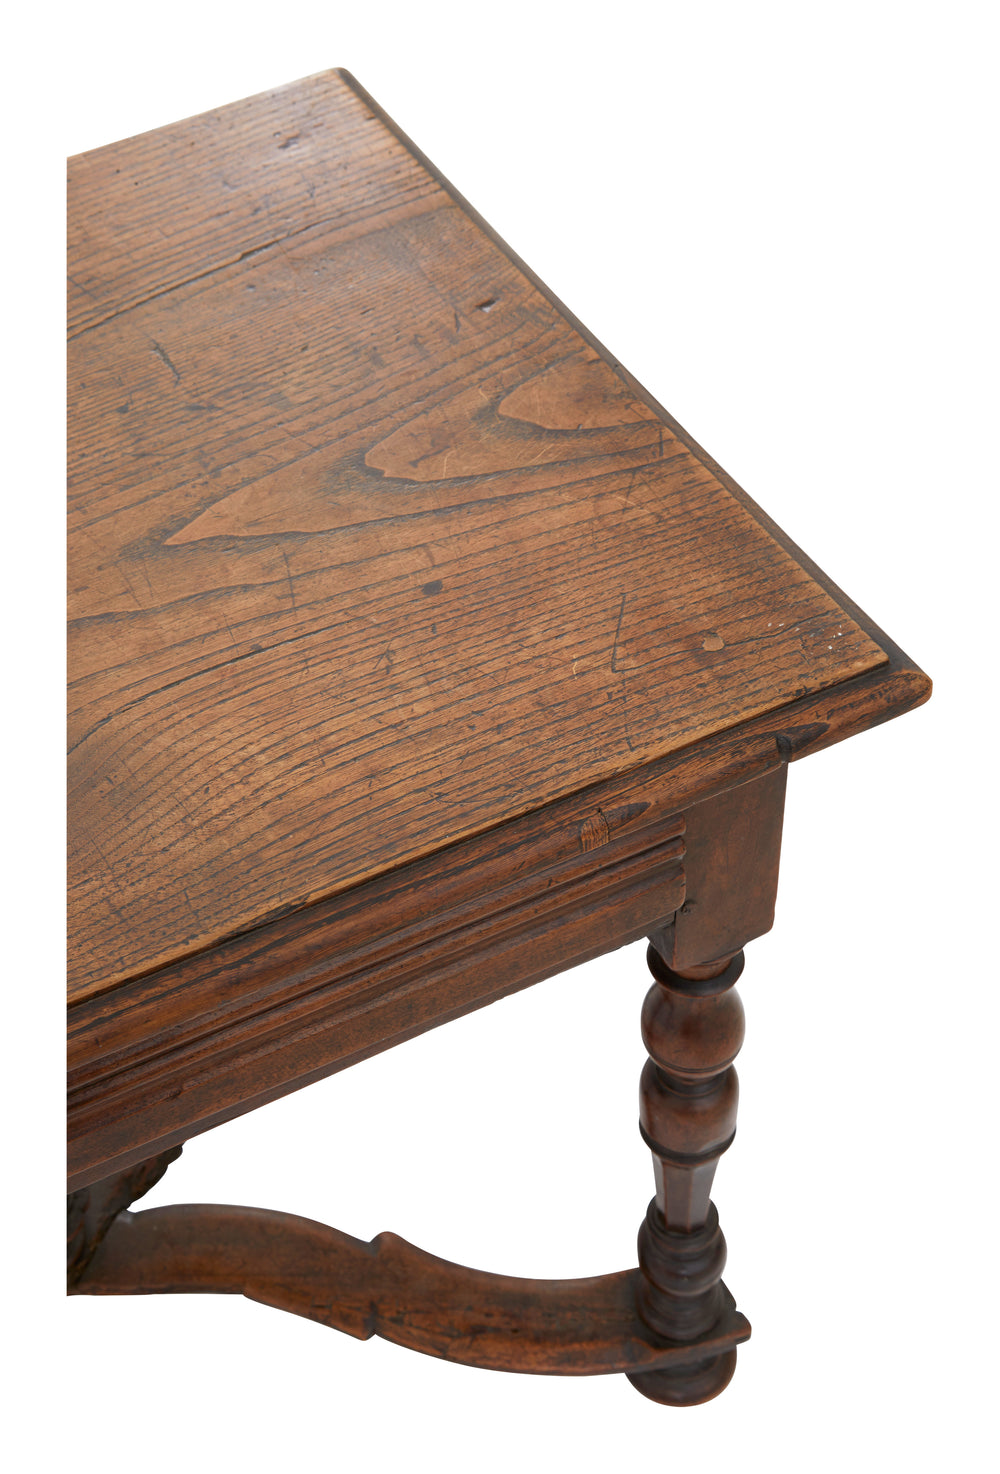 Antique French Wood Table